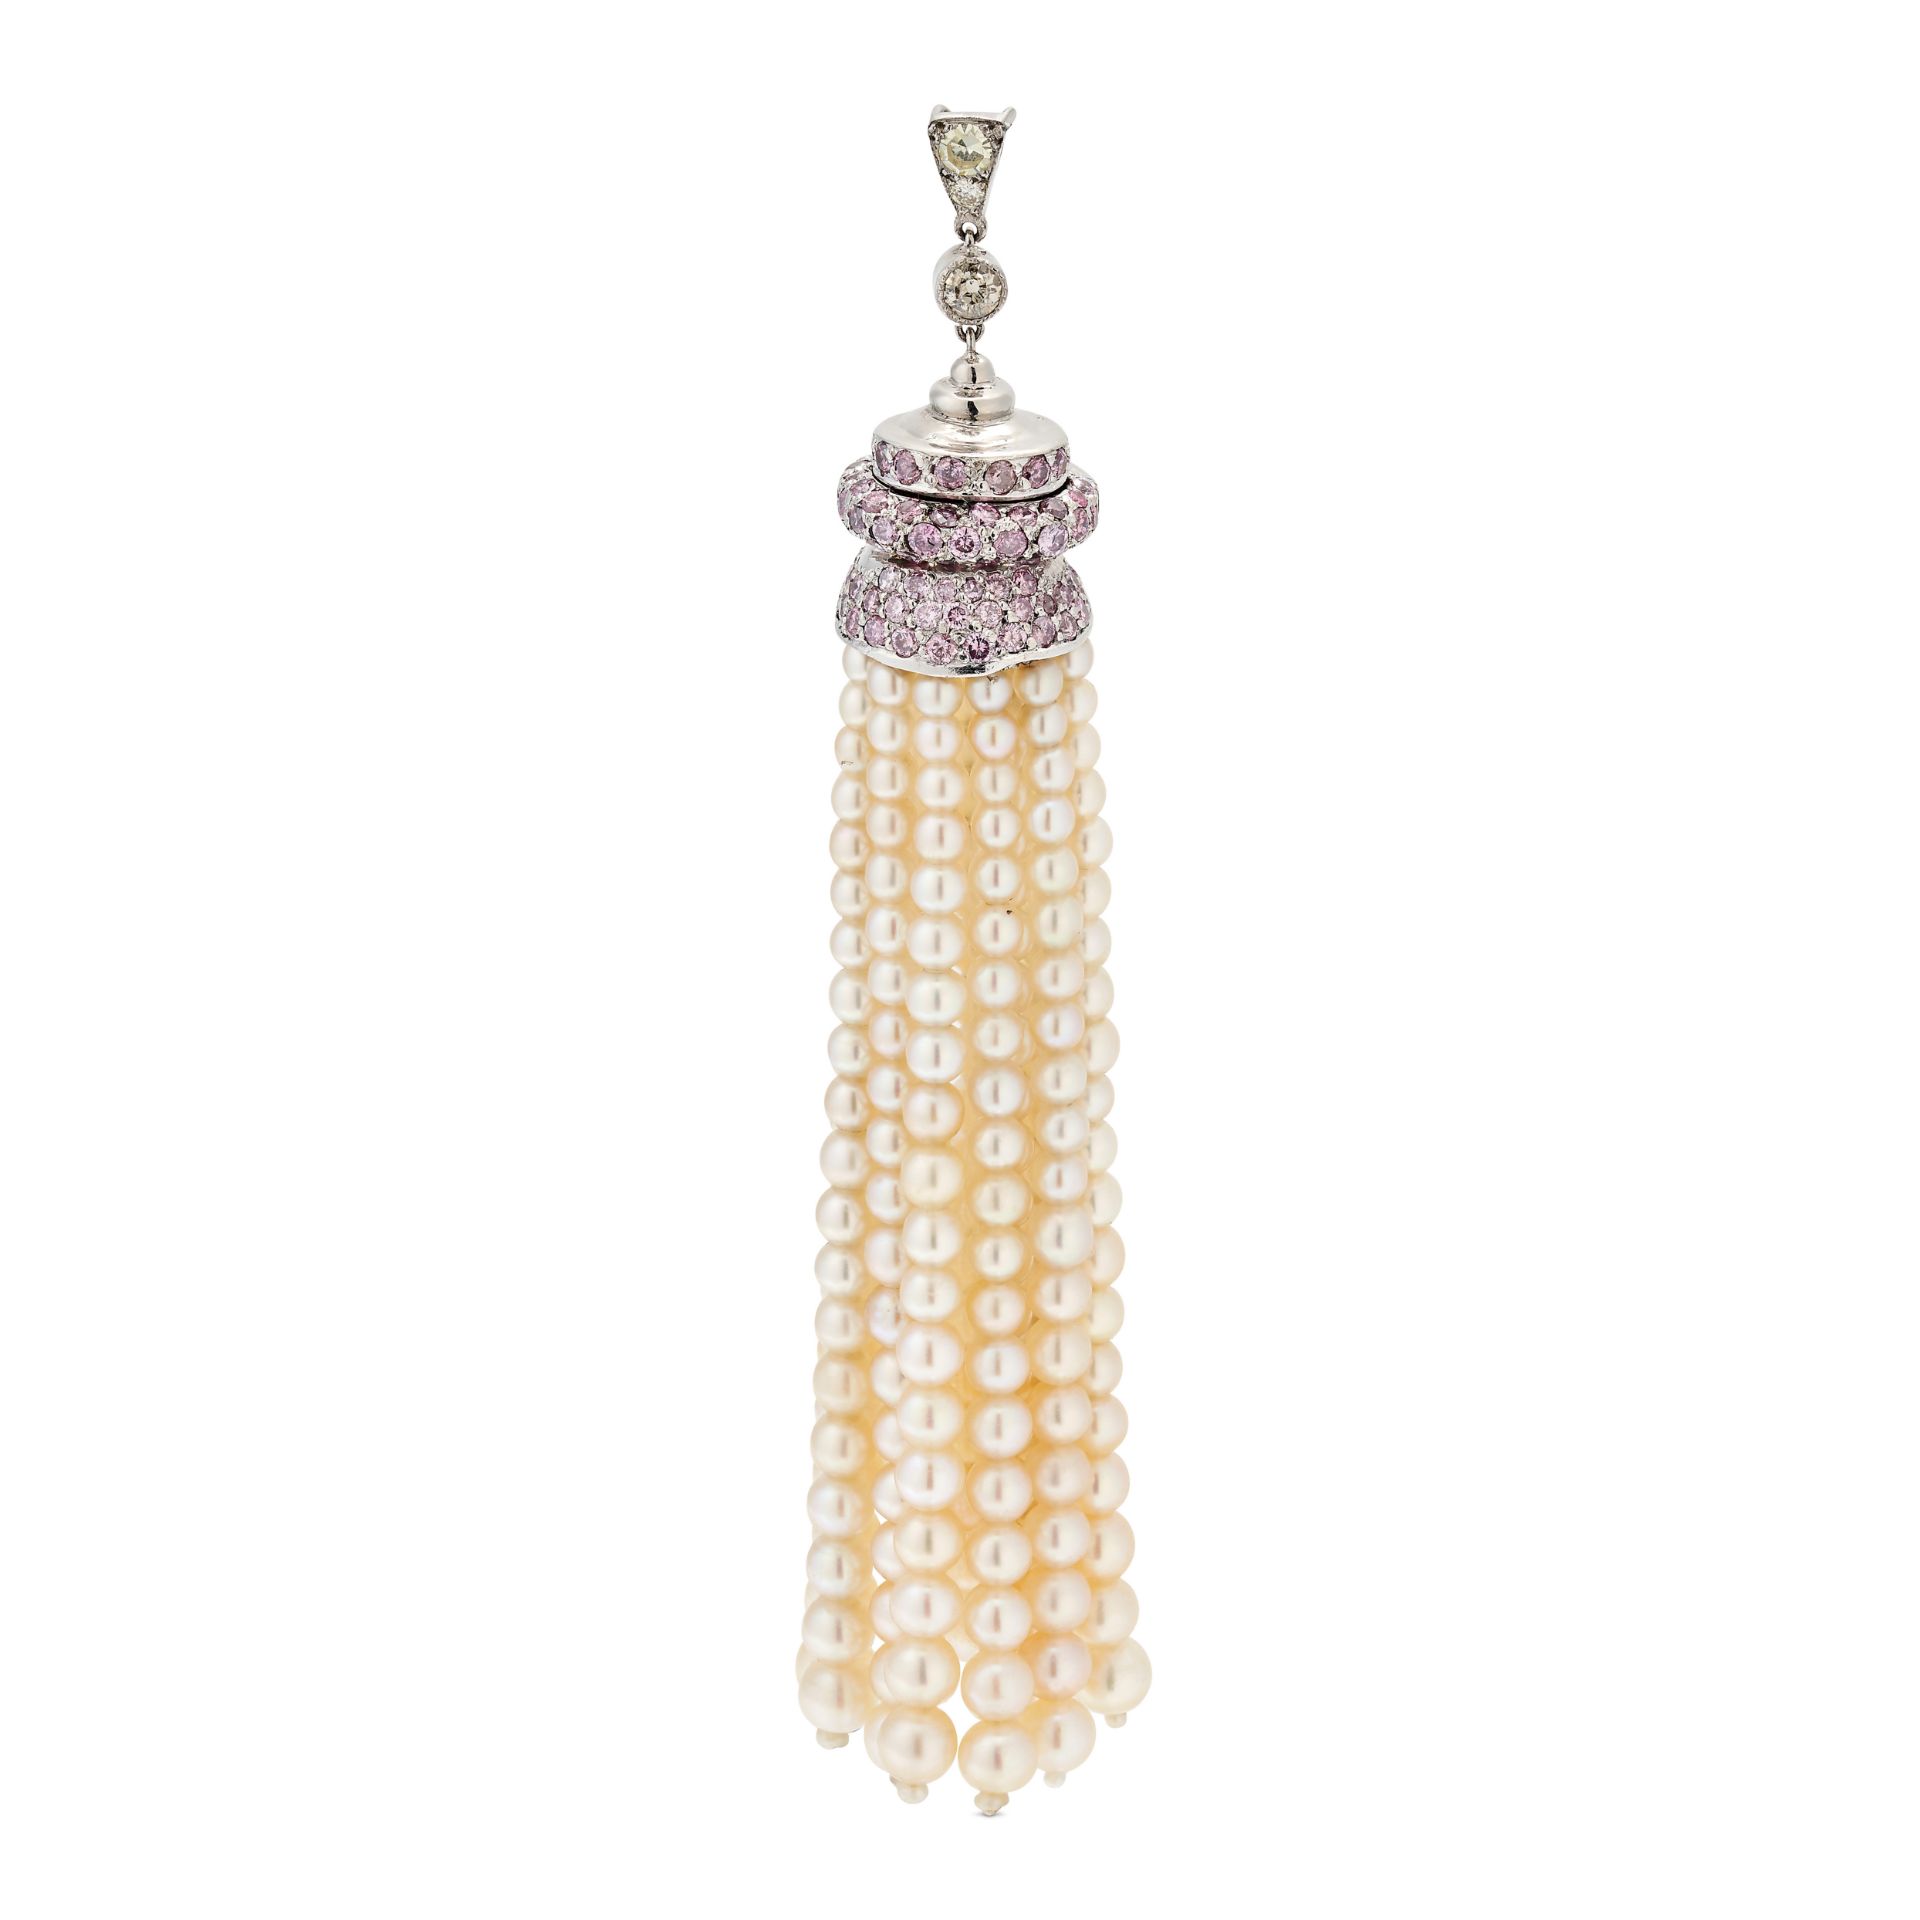 A FINE NATURAL SALTWATER PEARL AND DIAMOND TASSEL PENDANT set with pink and white round brilliant...